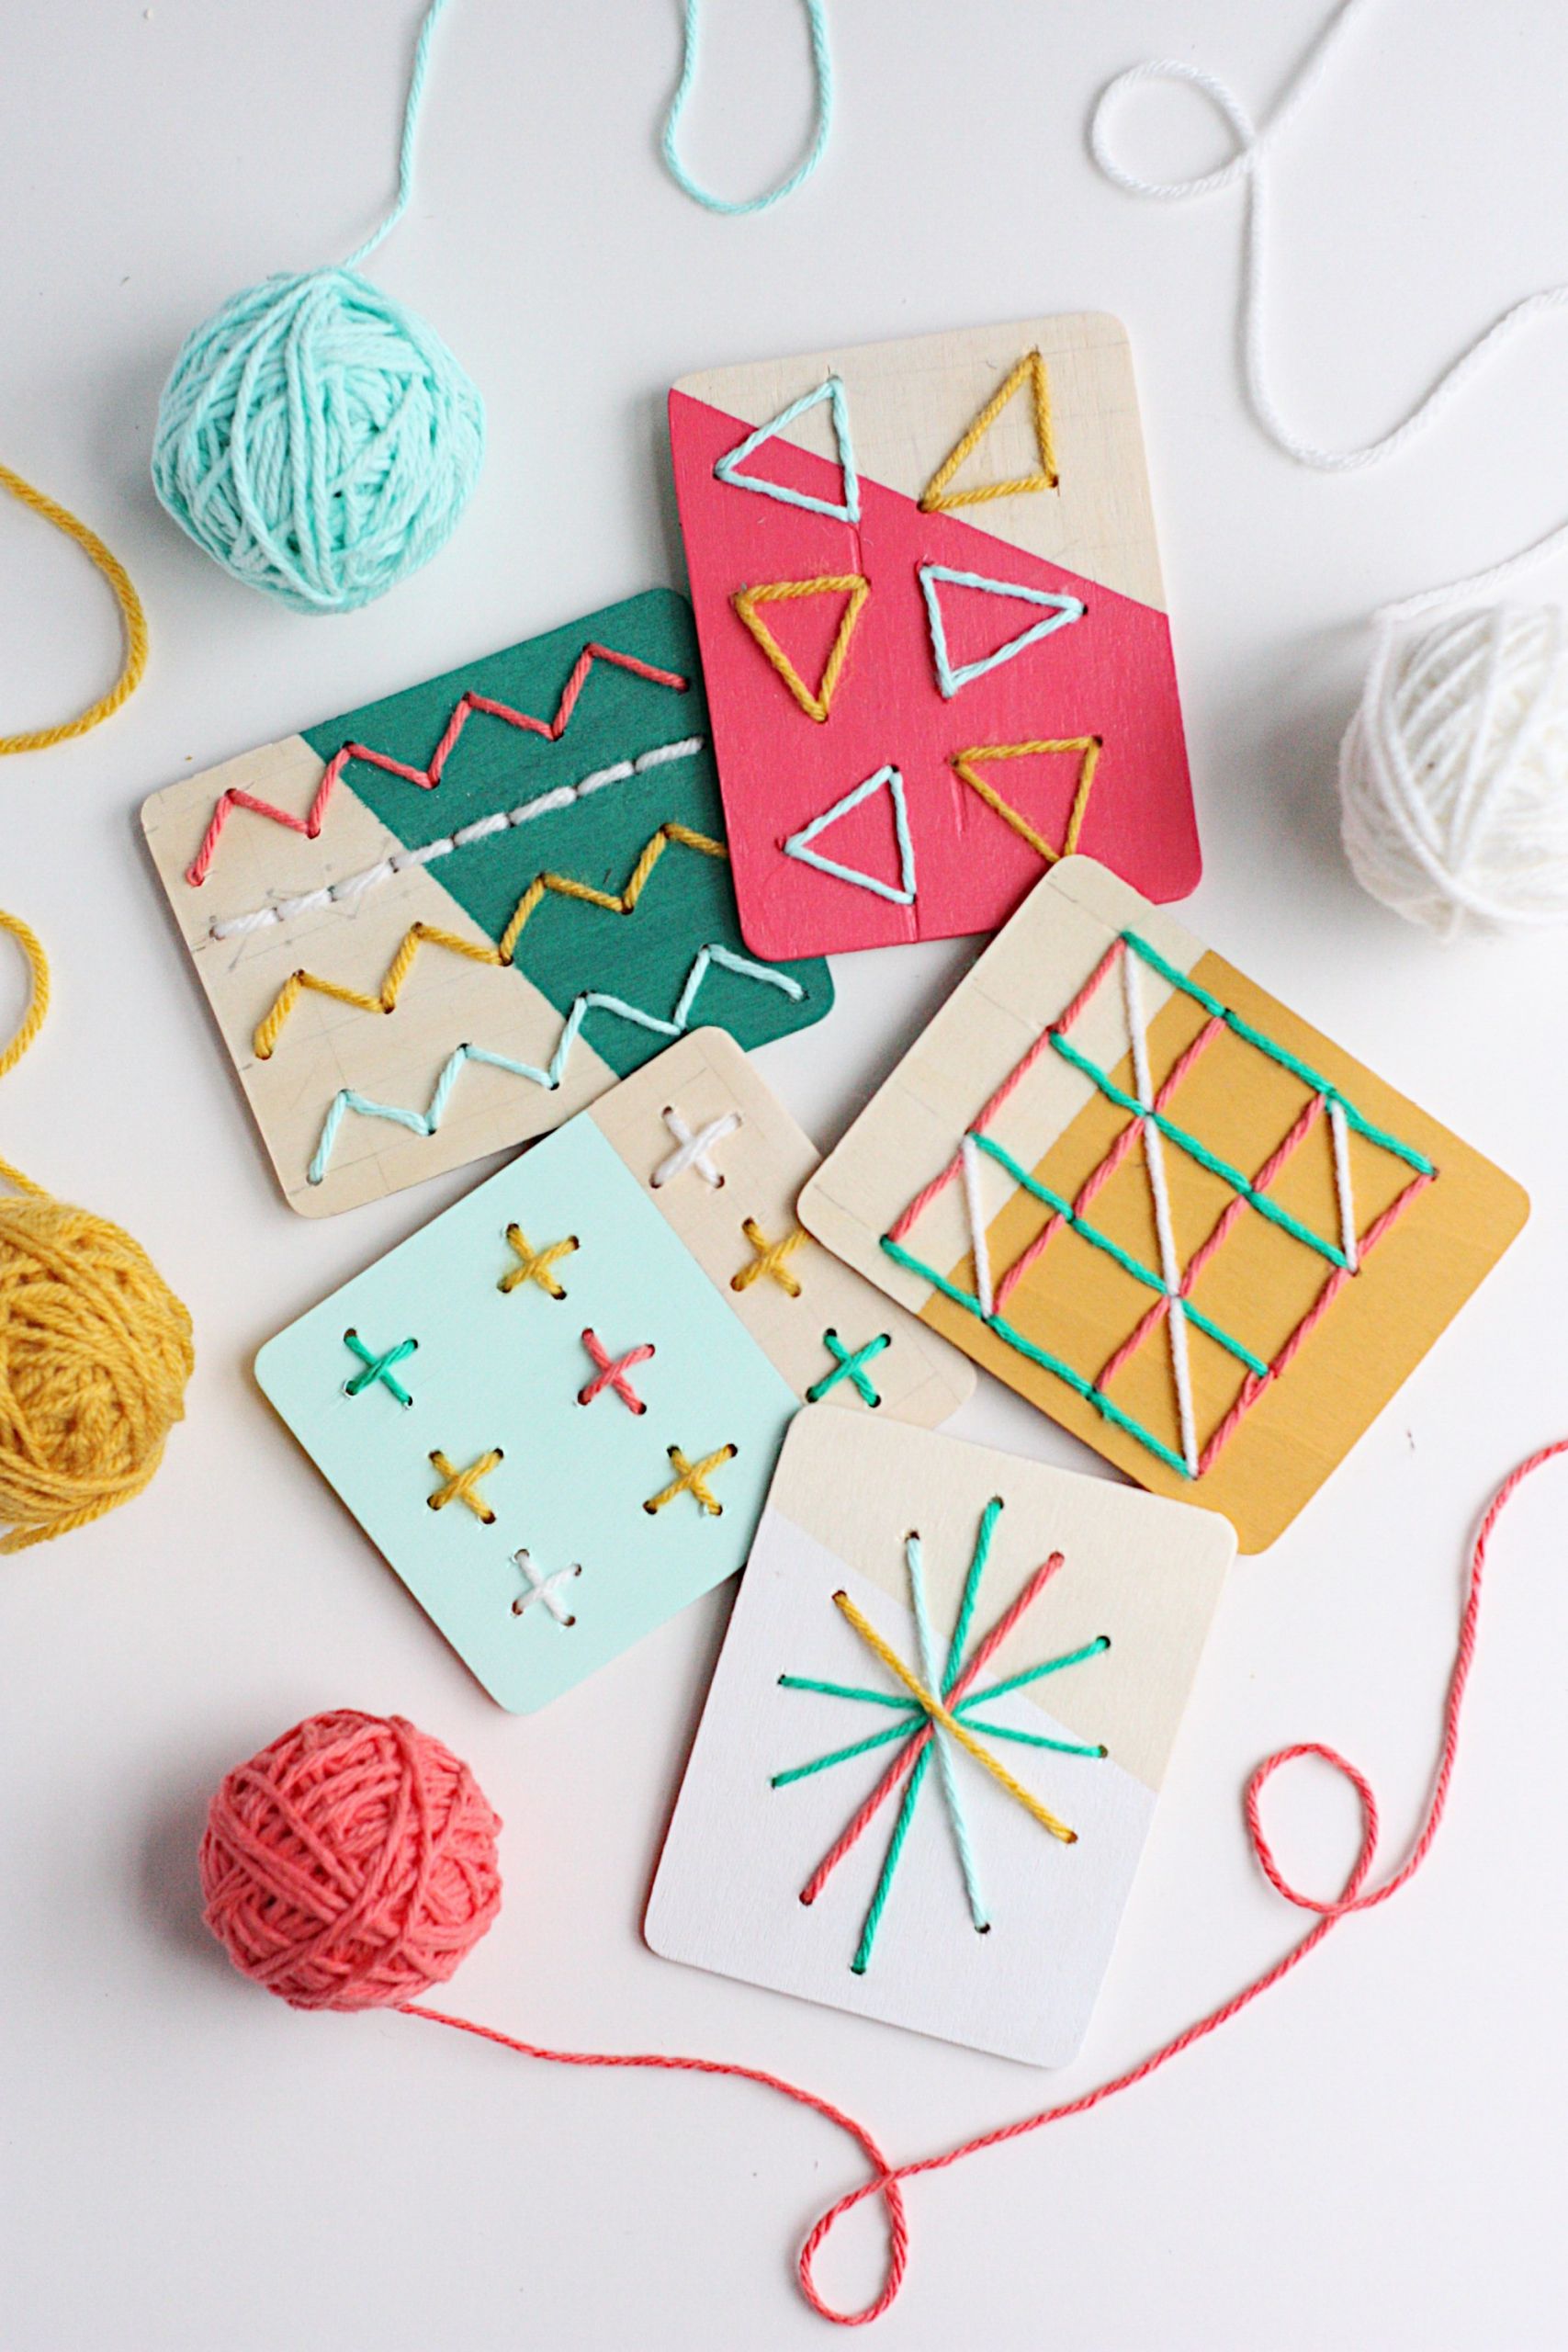 DIY Kids Project
 11 DIY Yarn Crafts That Will Amaze Your Kids Shelterness